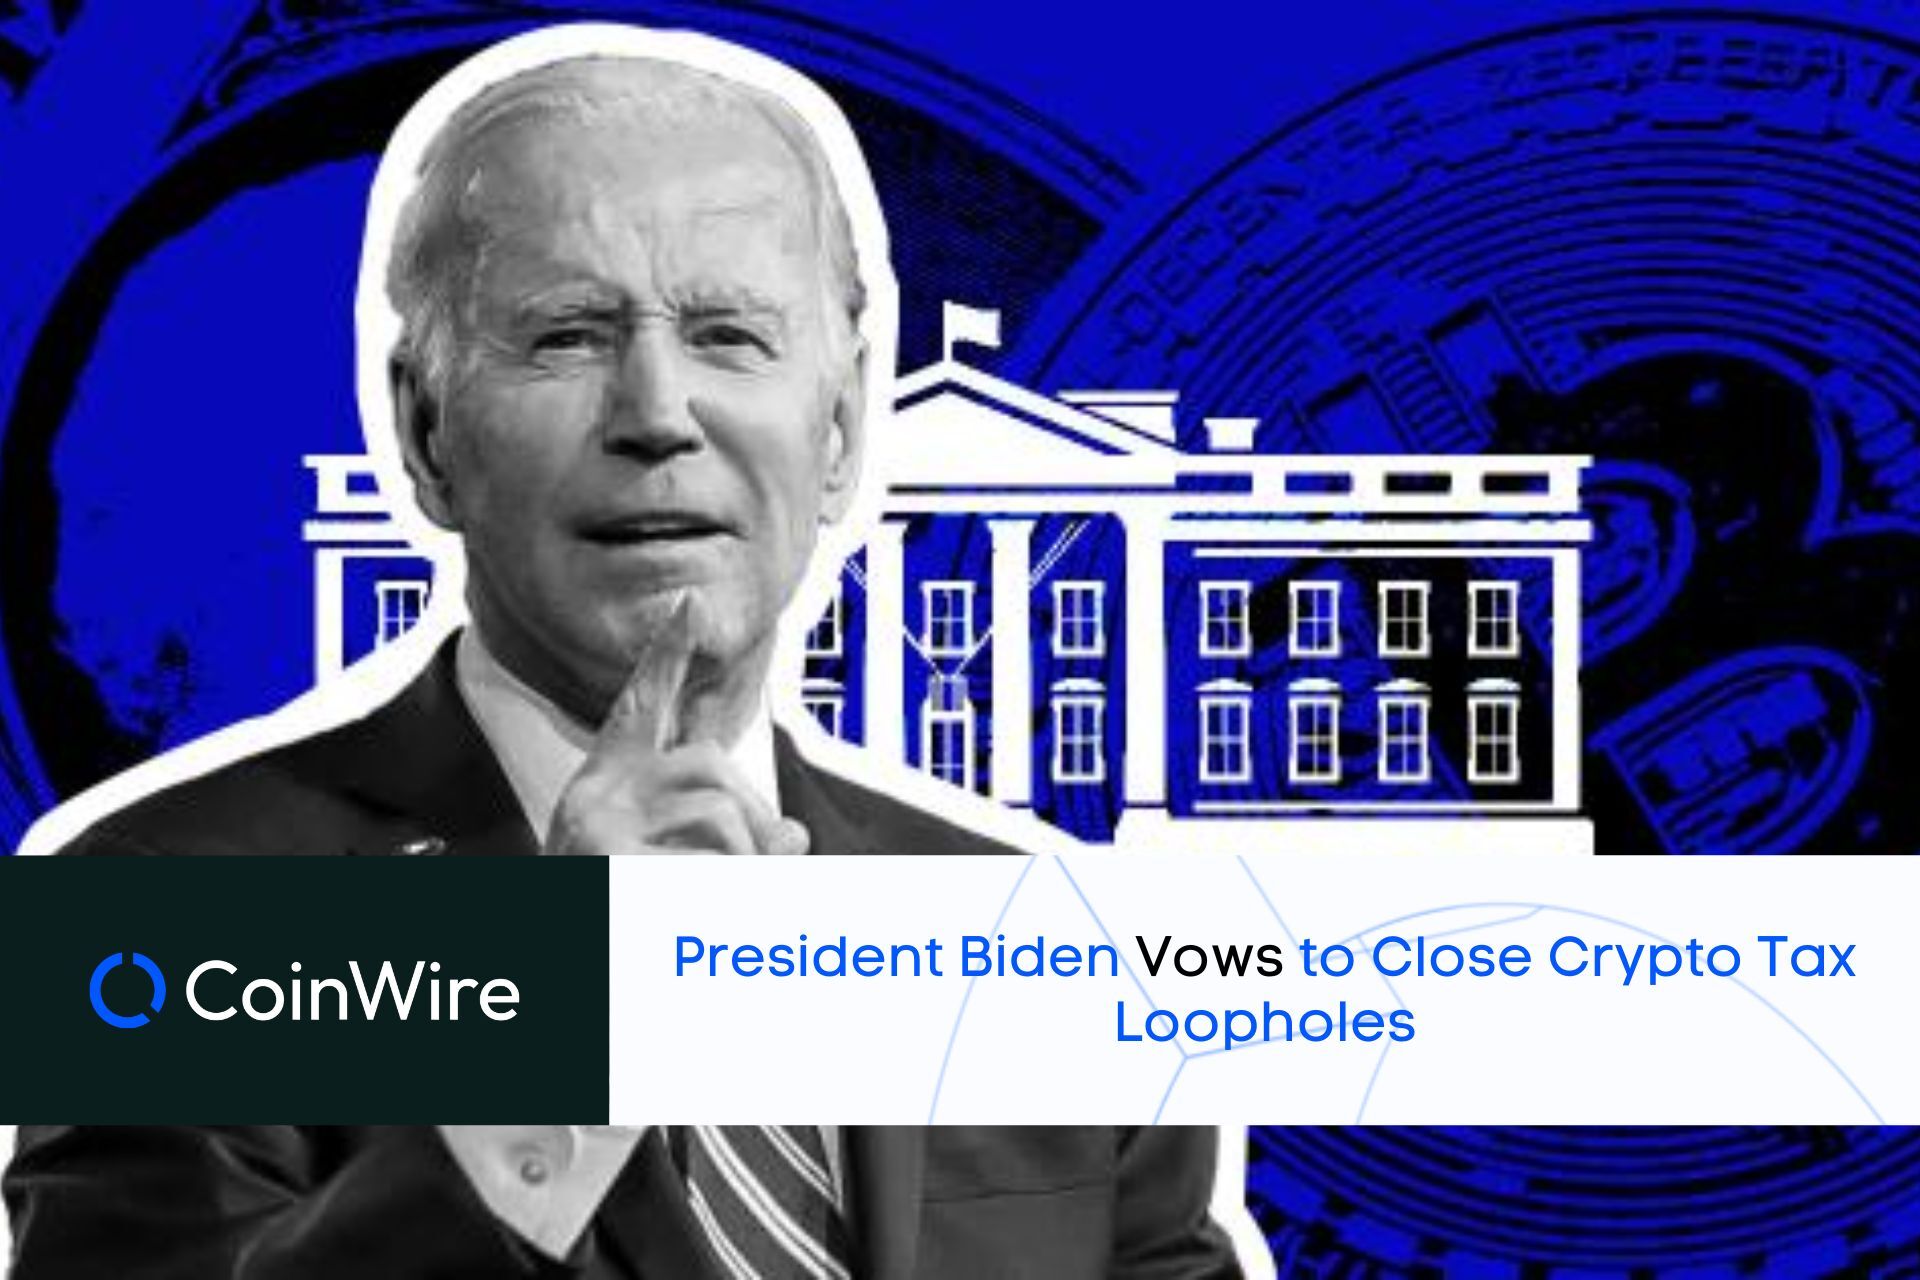 President Biden Vows To Close Crypto Tax Loopholes, Ensure Fairness In The Tax System